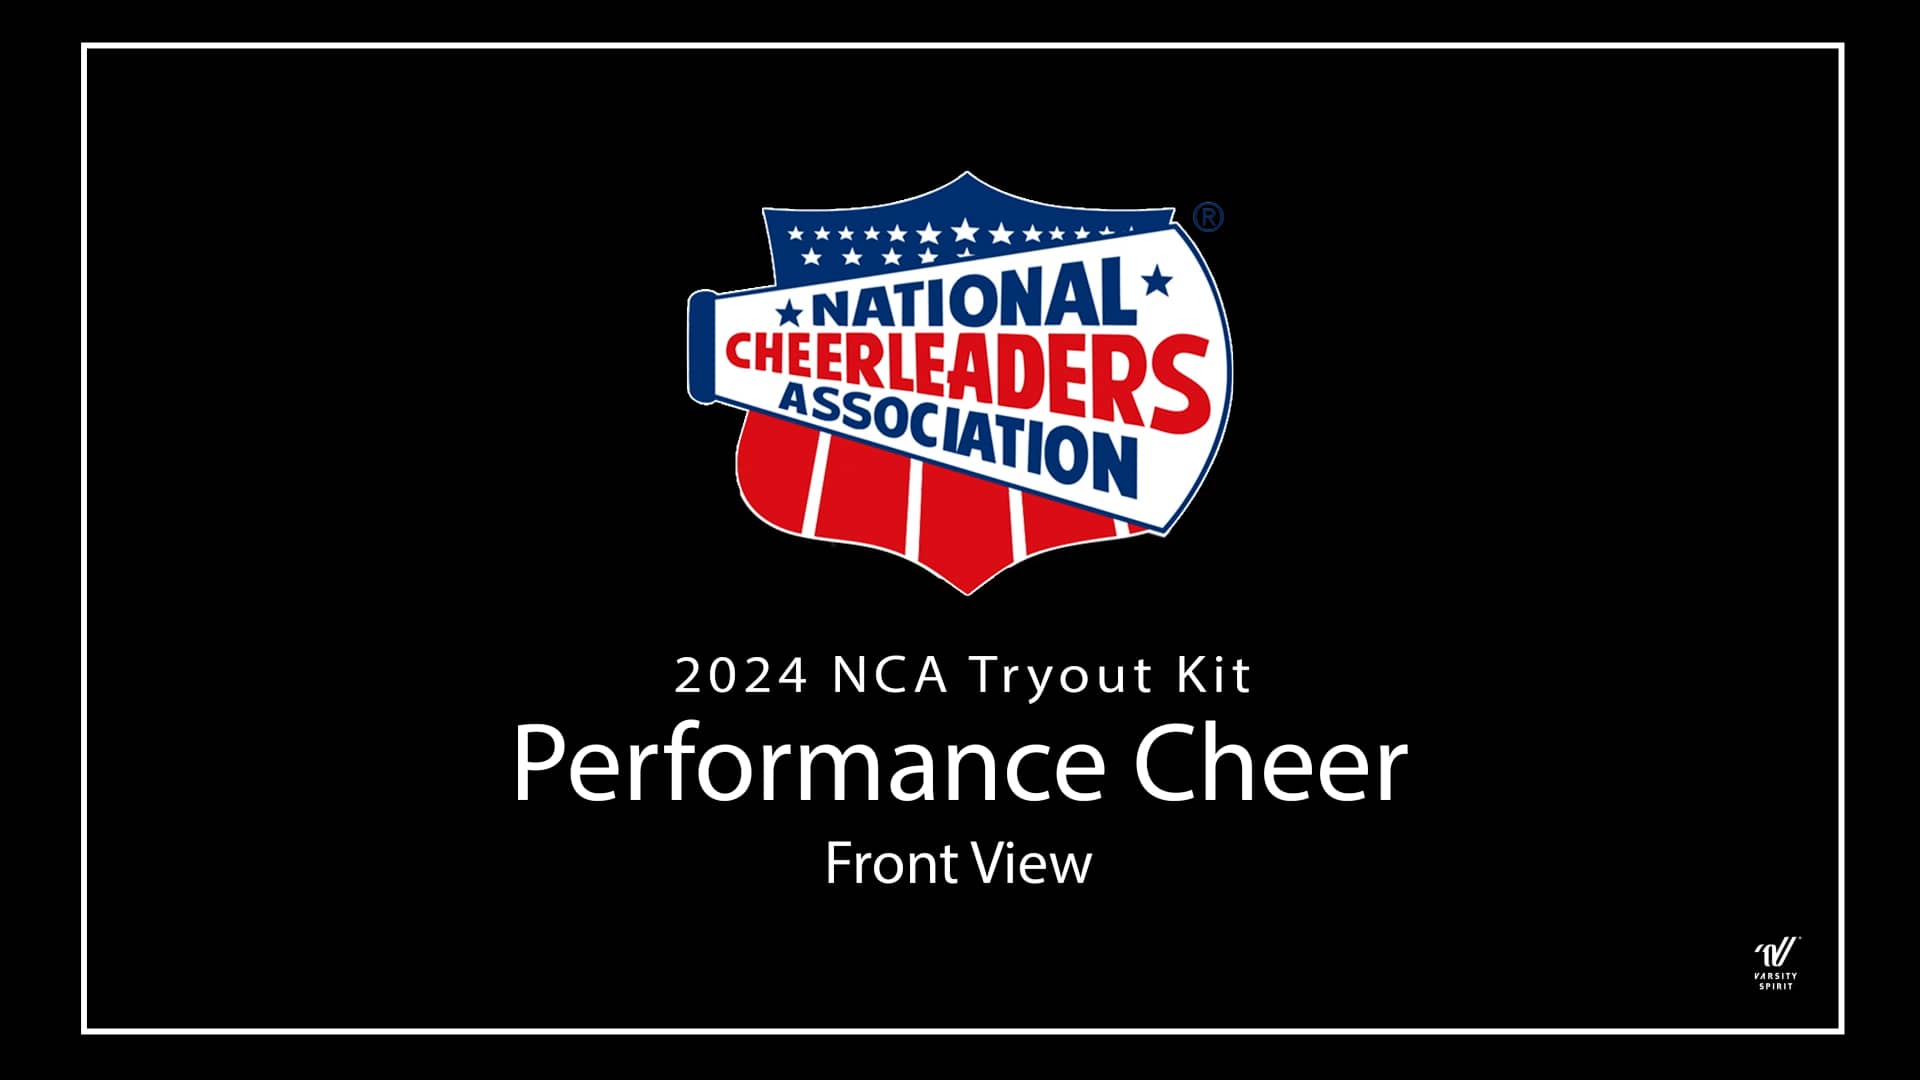 2024 NCA Tryout Kit Performance Cheer Front View on Vimeo